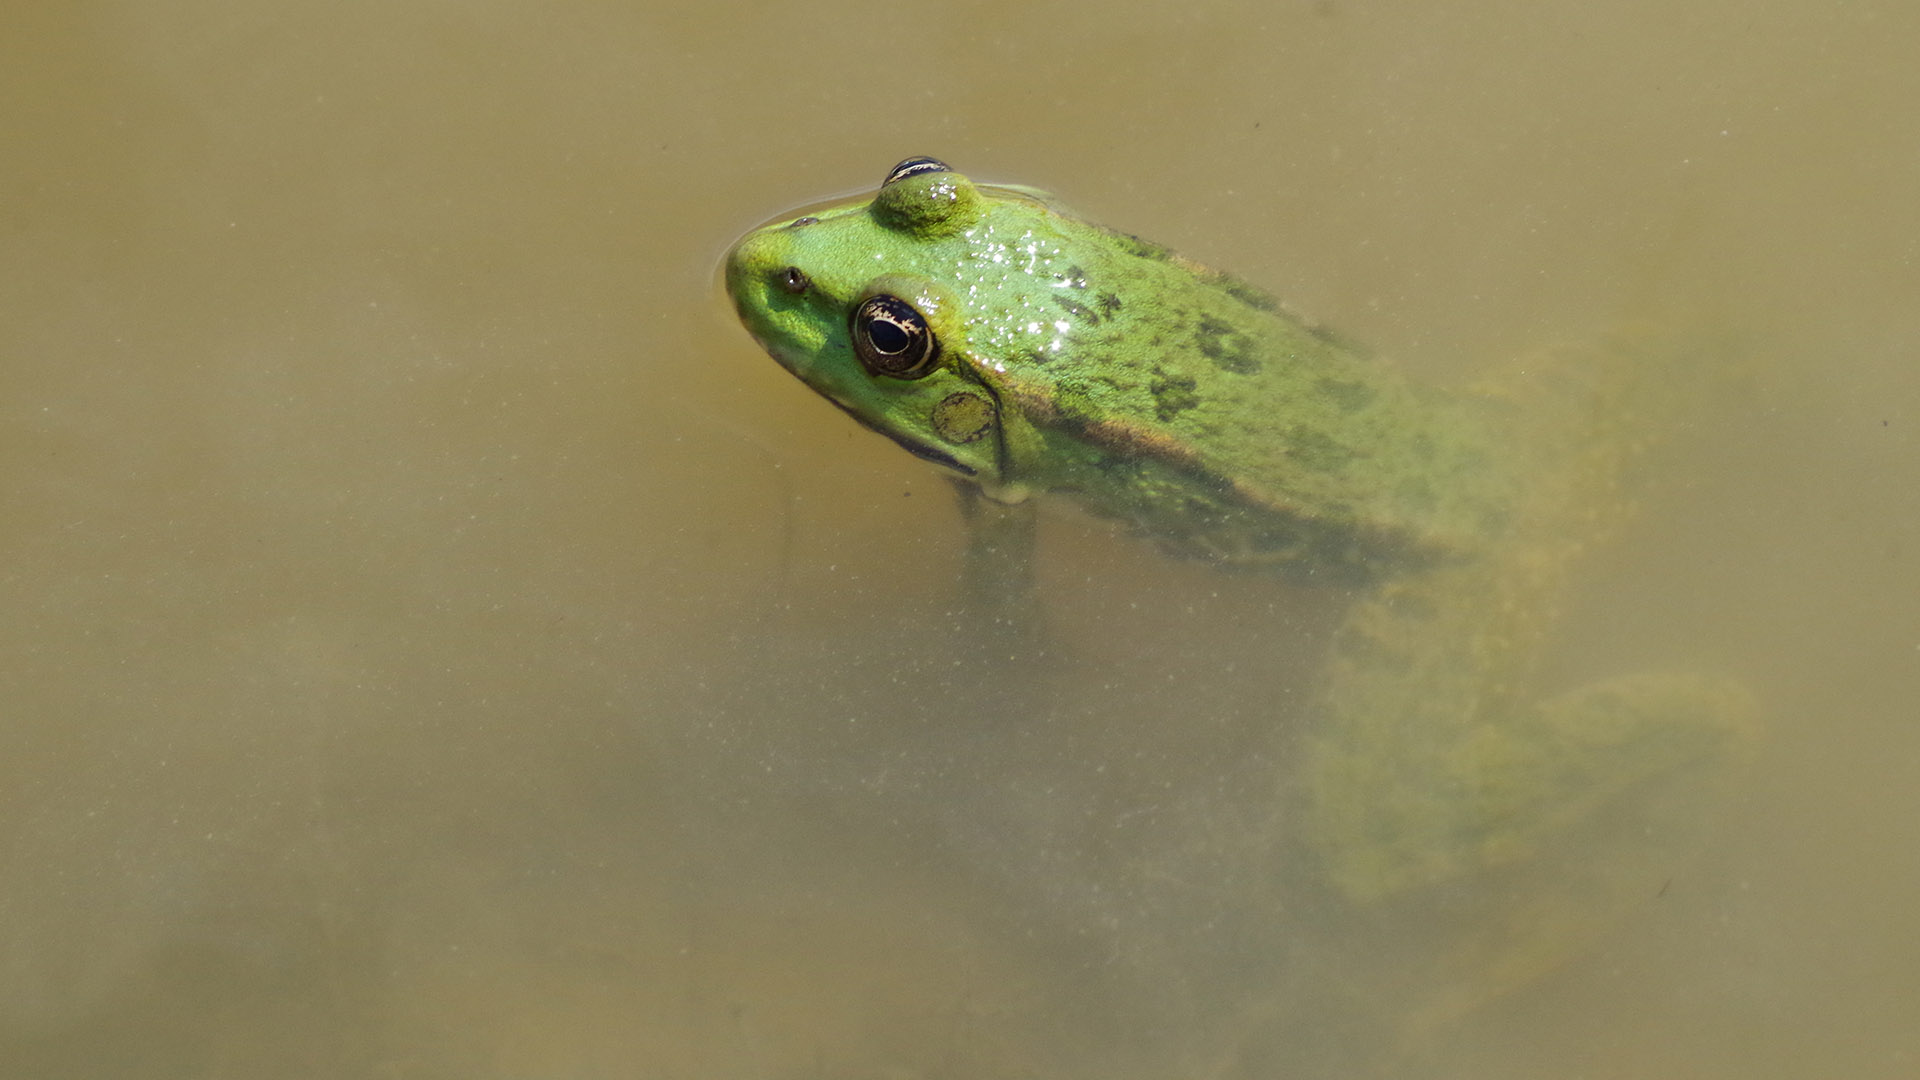 Save The Frogs in Cambridge, United Kingdom – September 18th, 2019